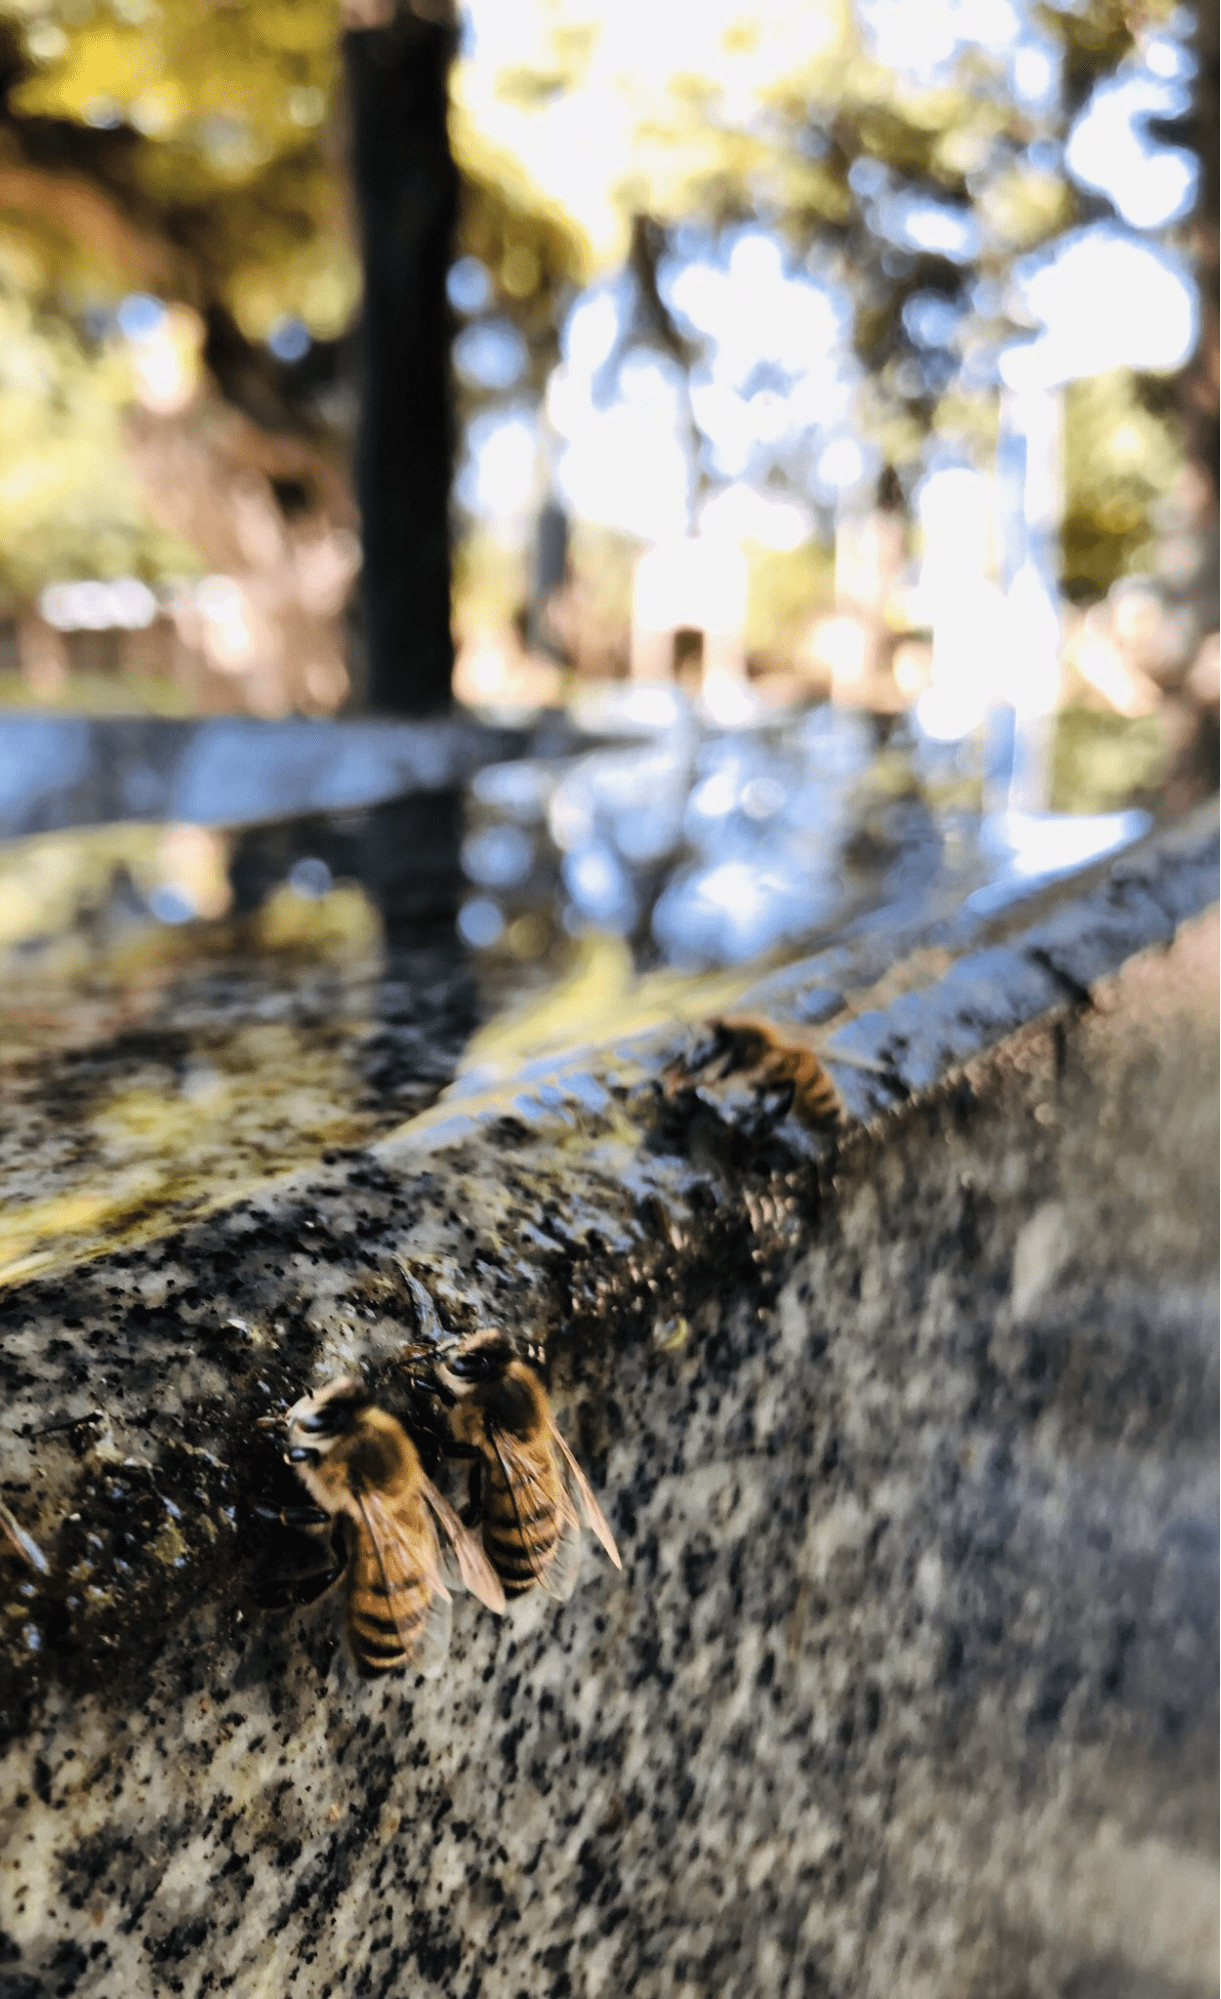 Japanese shrine bees - thirsty bees